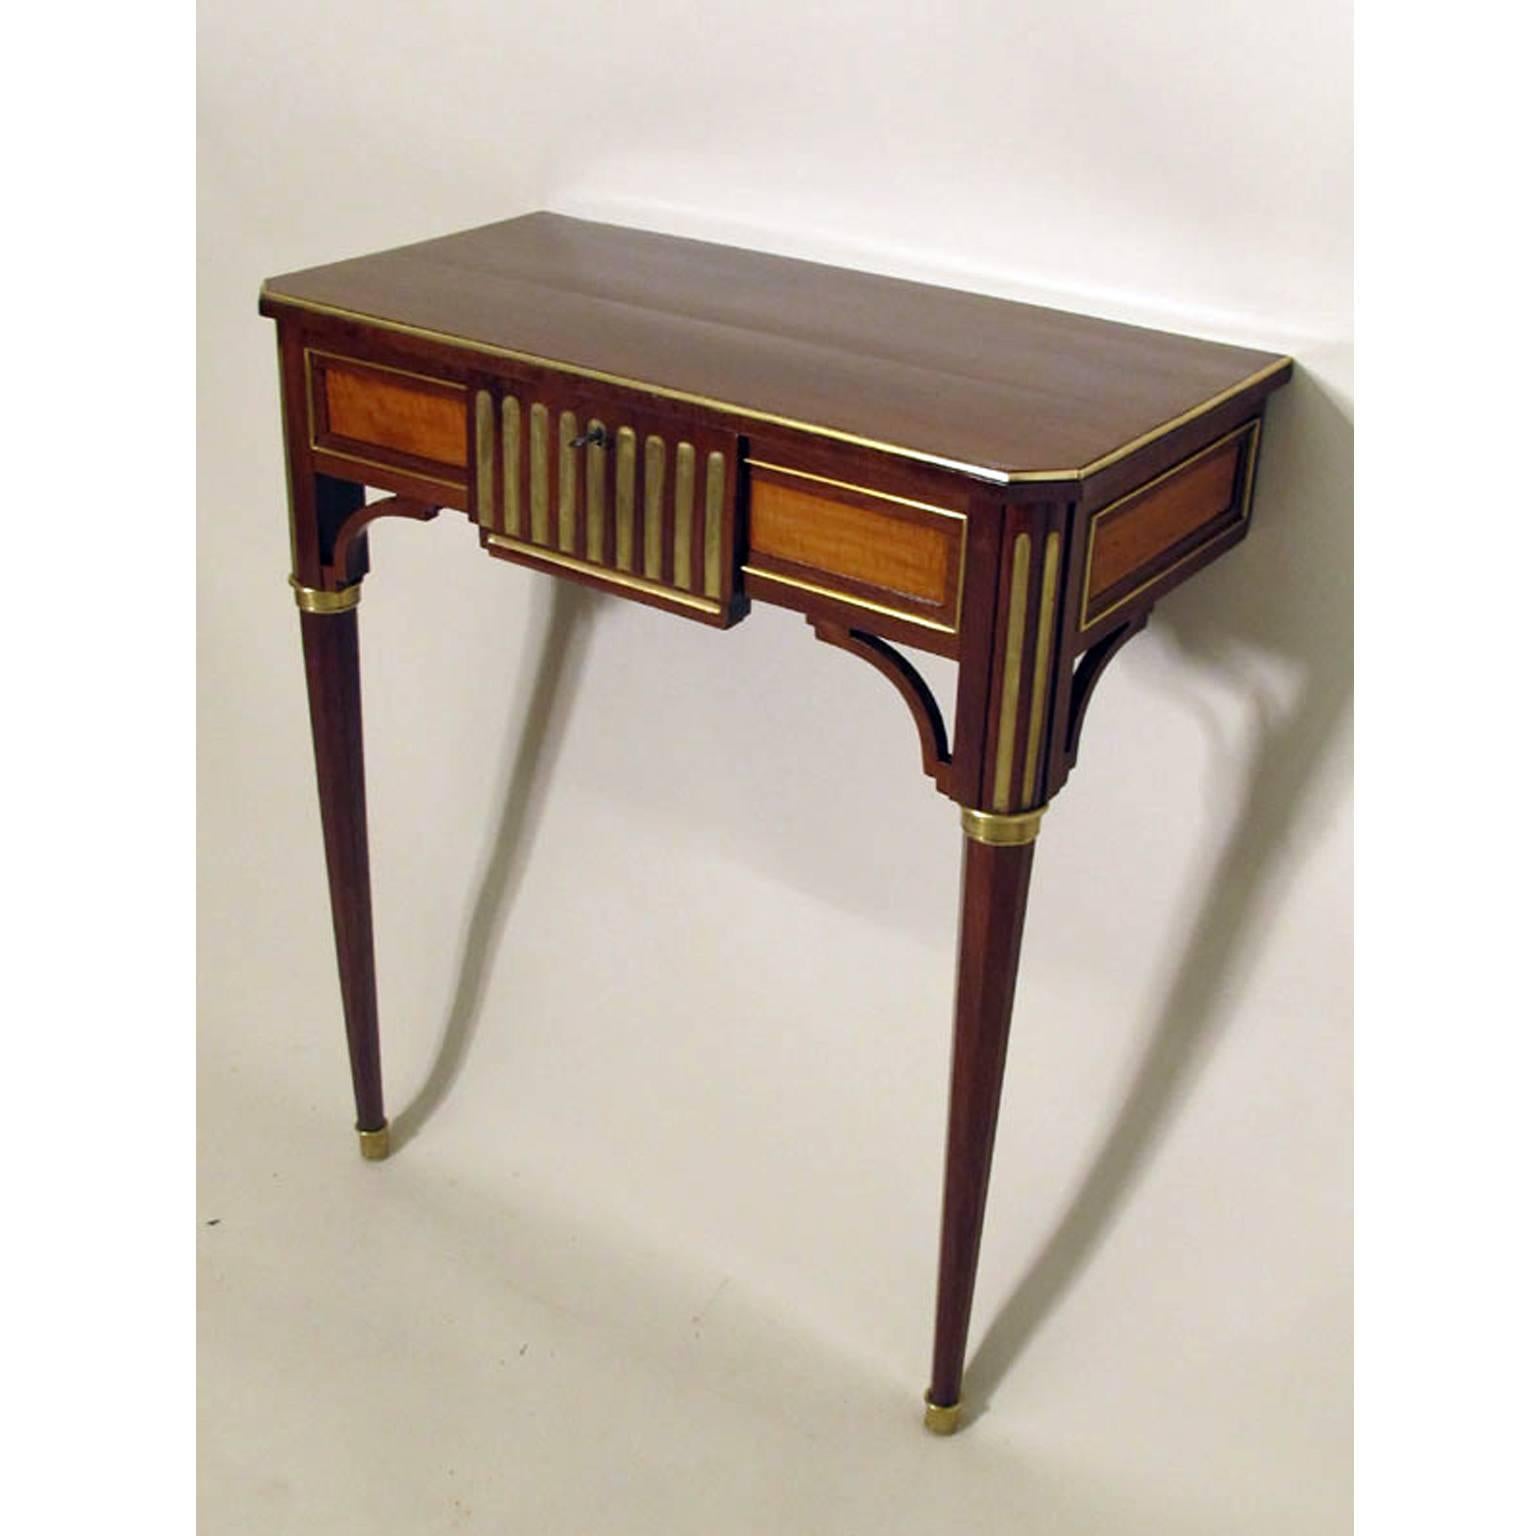 Empire console table with slanted corners on octagonal tapered feet with brass sabots and capitals. The coffered frame with one narrow drawer and brass accents.